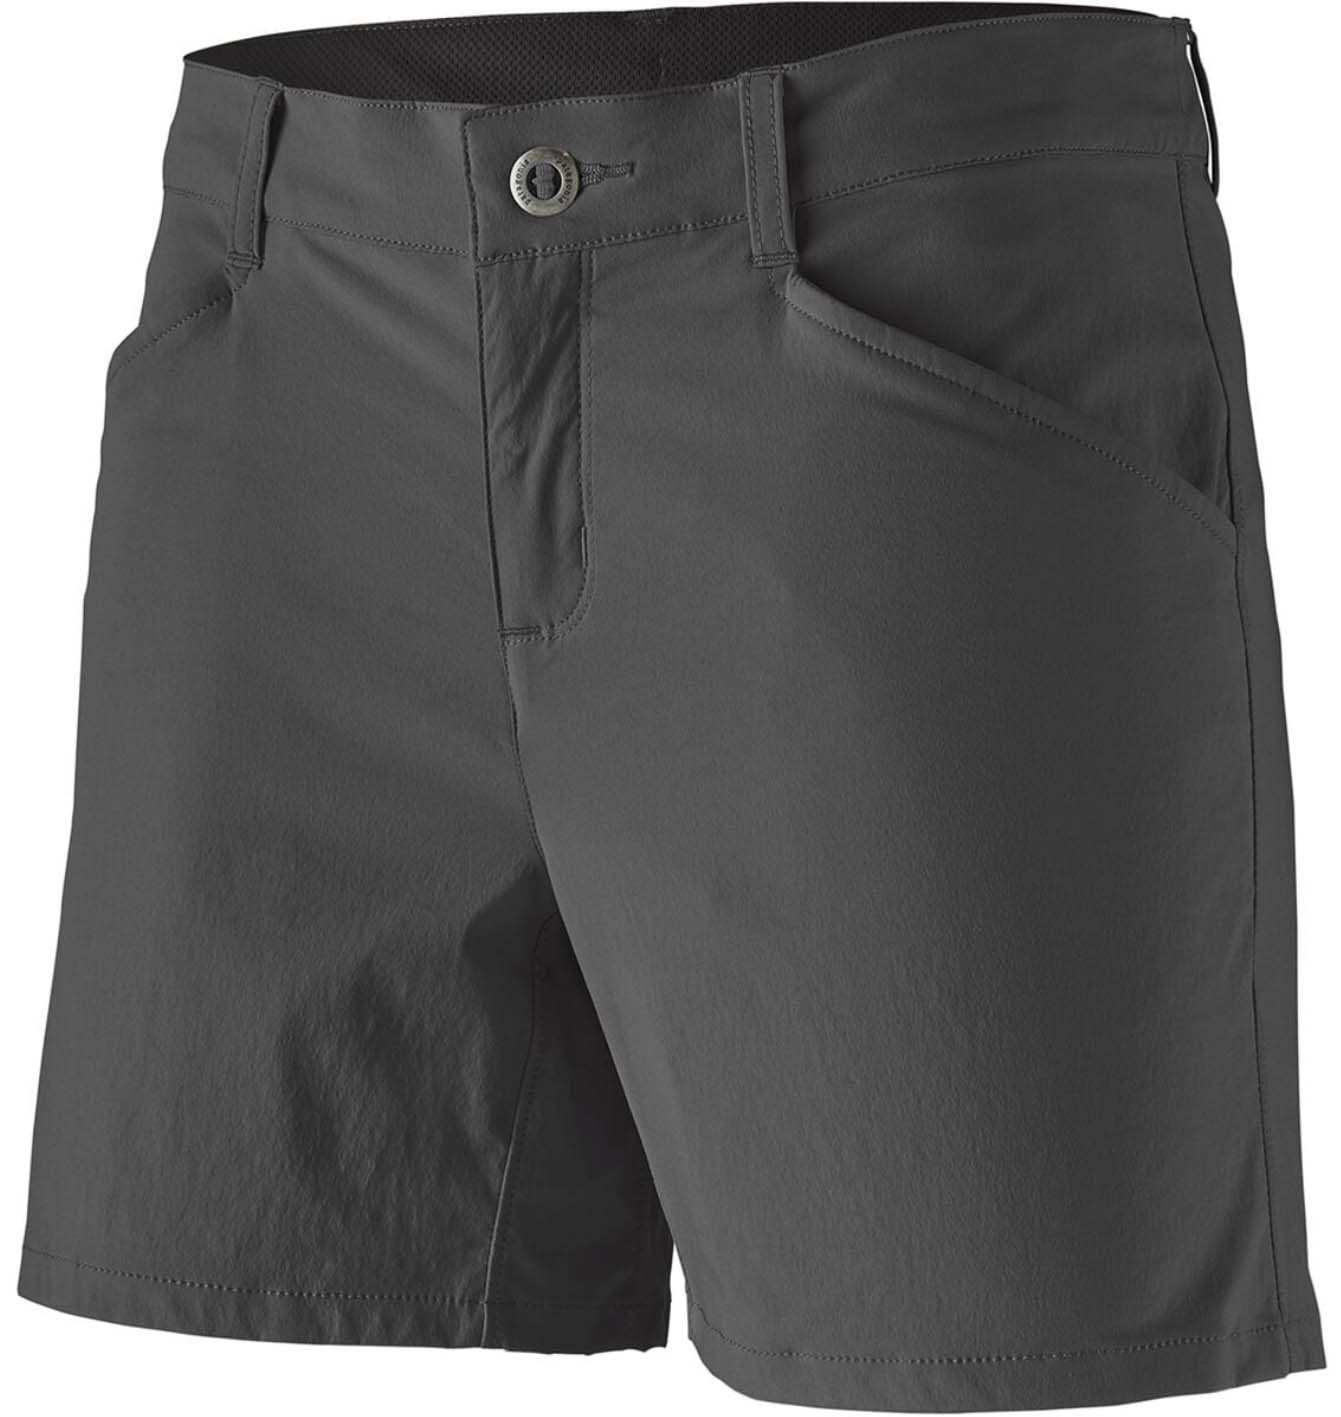 Girls' Black OP Athletic Shorts with Elastic White Band and Trim Size M  (7-8)